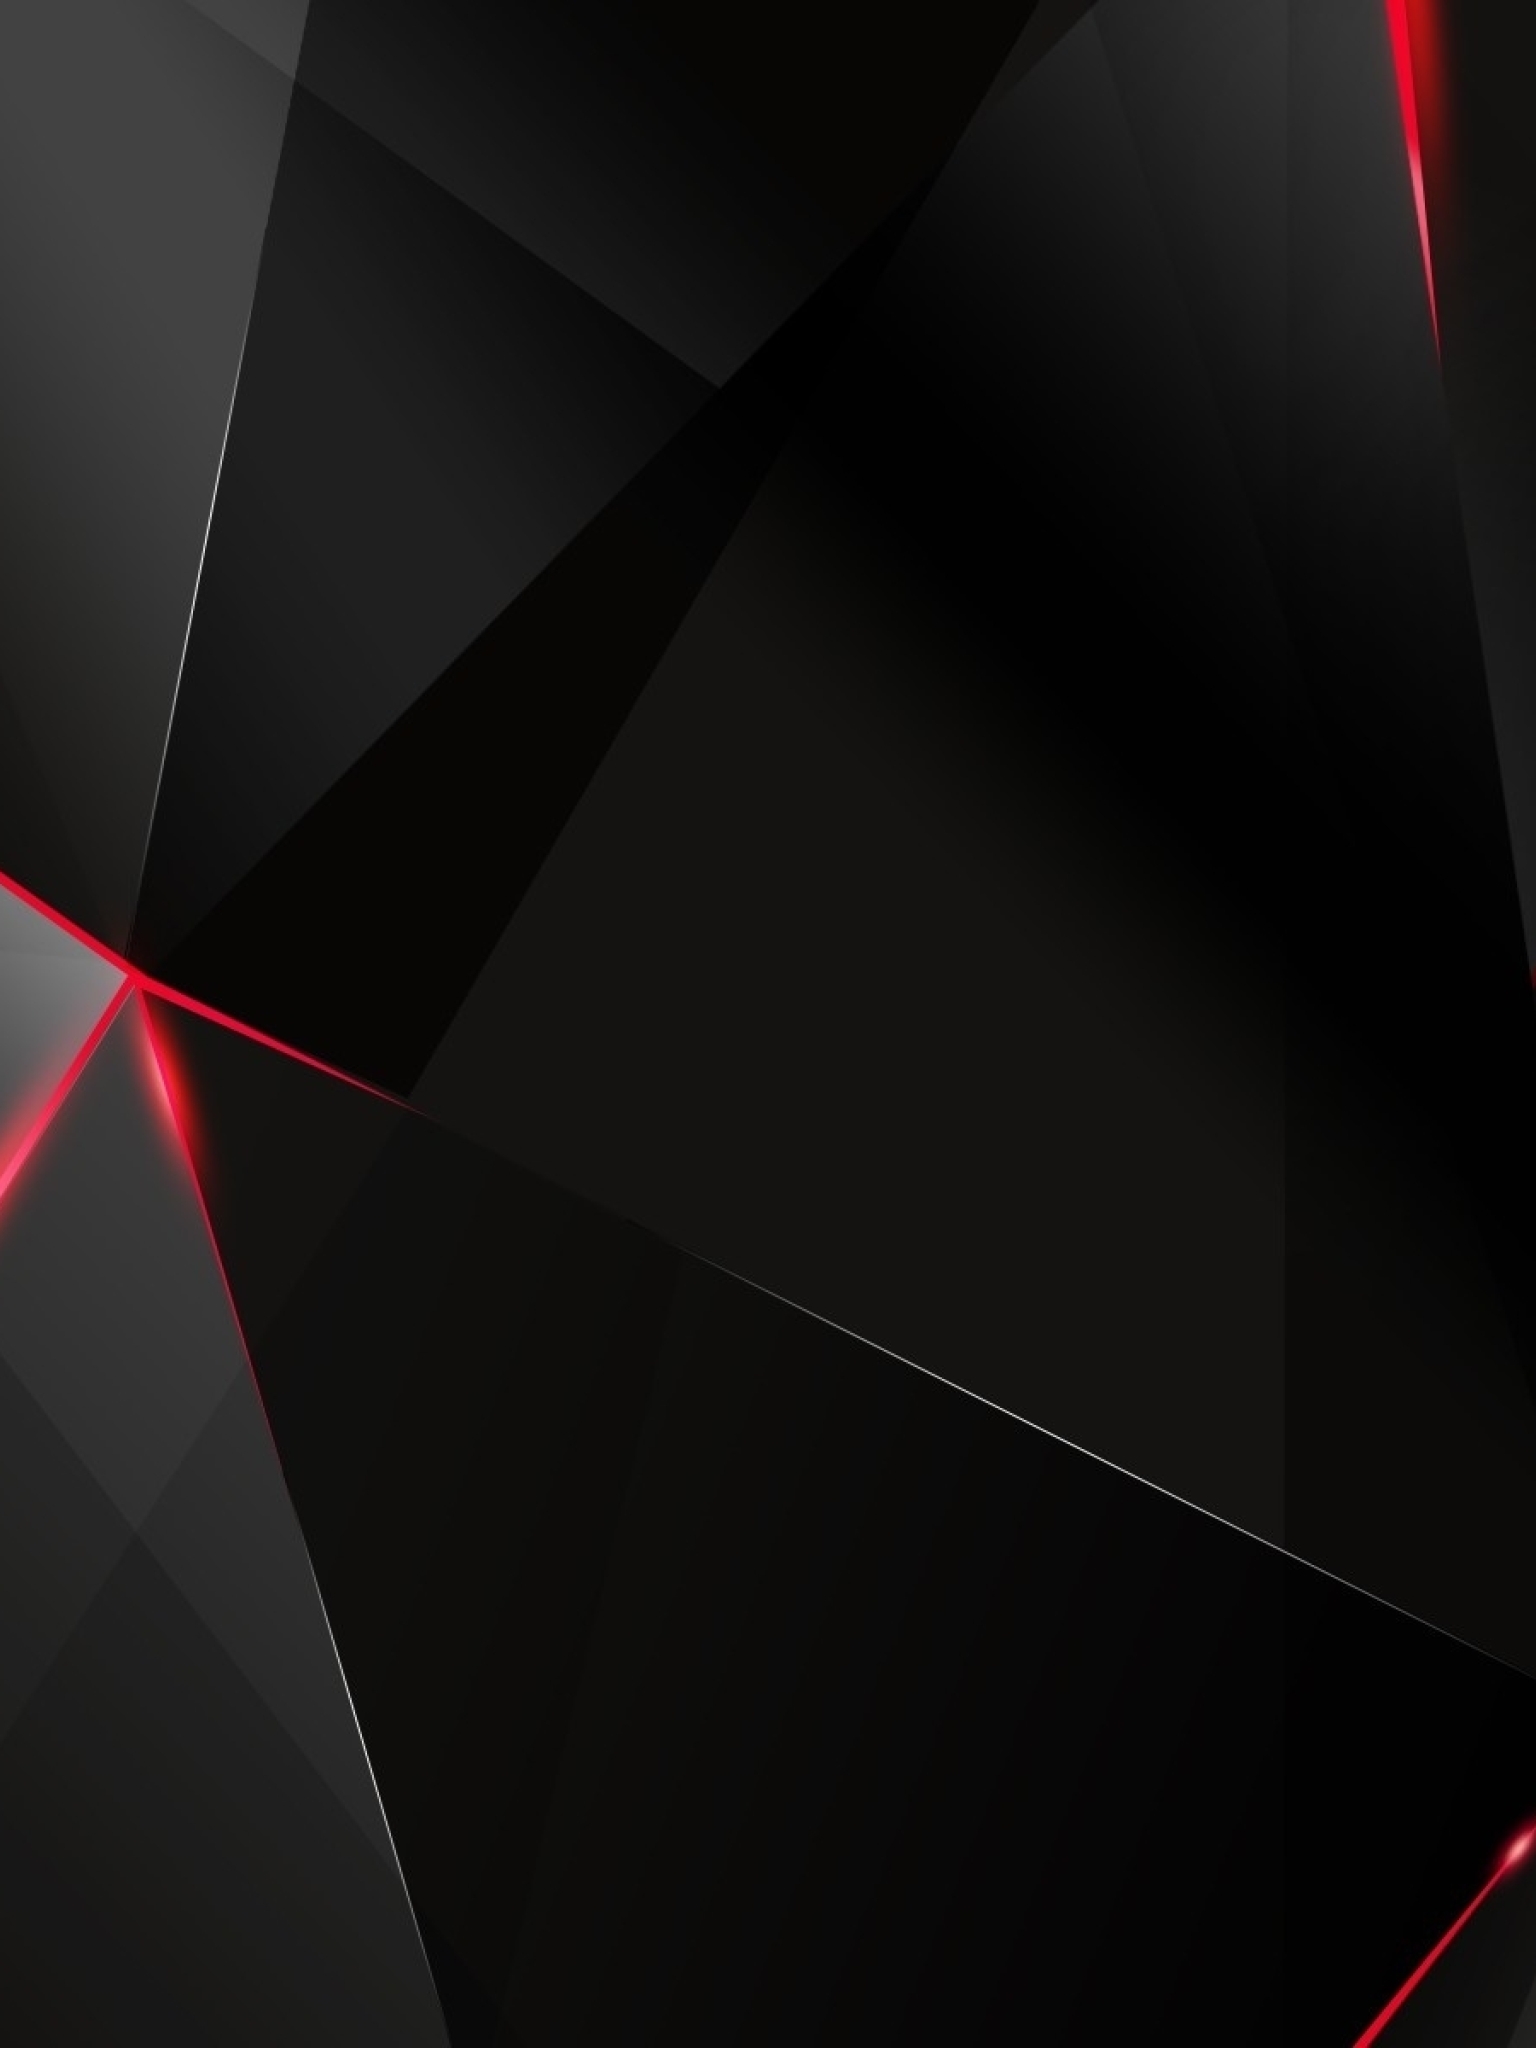 1536x48 Abstract Black Geometry Shape 1536x48 Resolution Wallpaper Hd Abstract 4k Wallpapers Images Photos And Background